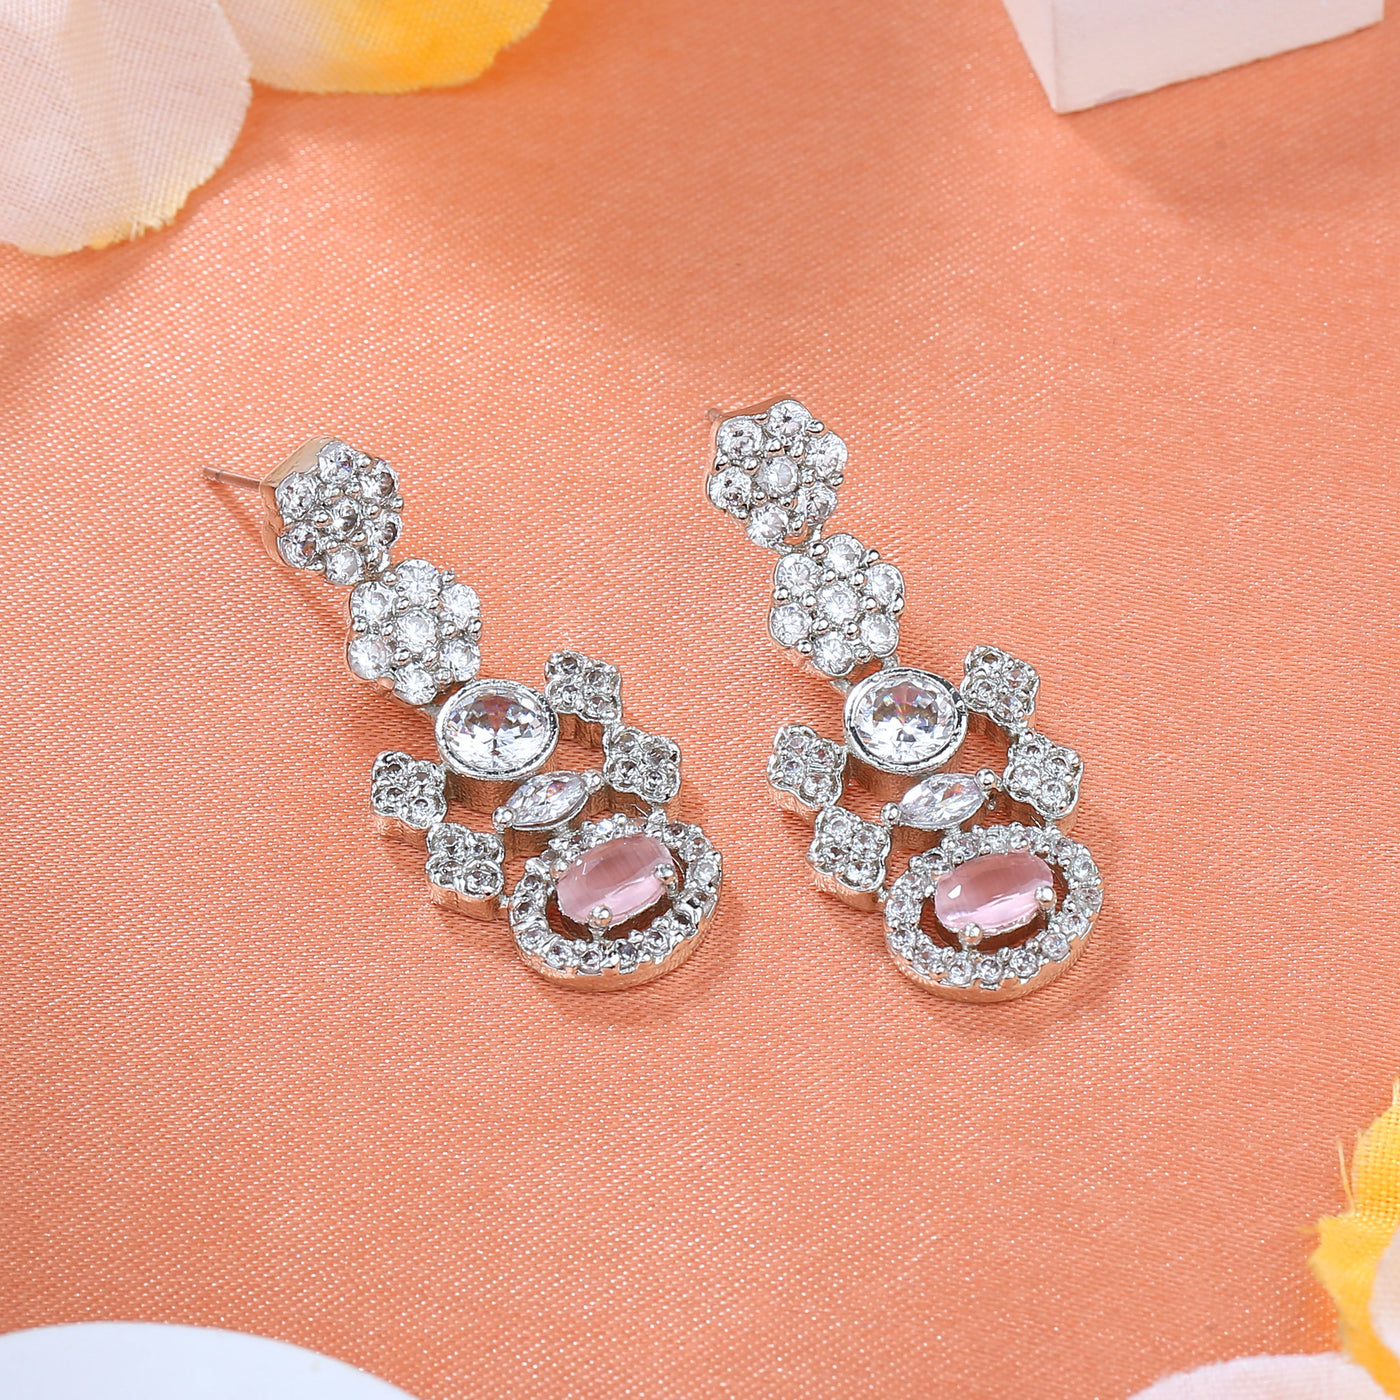 Estele Rhodium Plated Sparkling Drop Earrings with Mint Pink Stones for Women